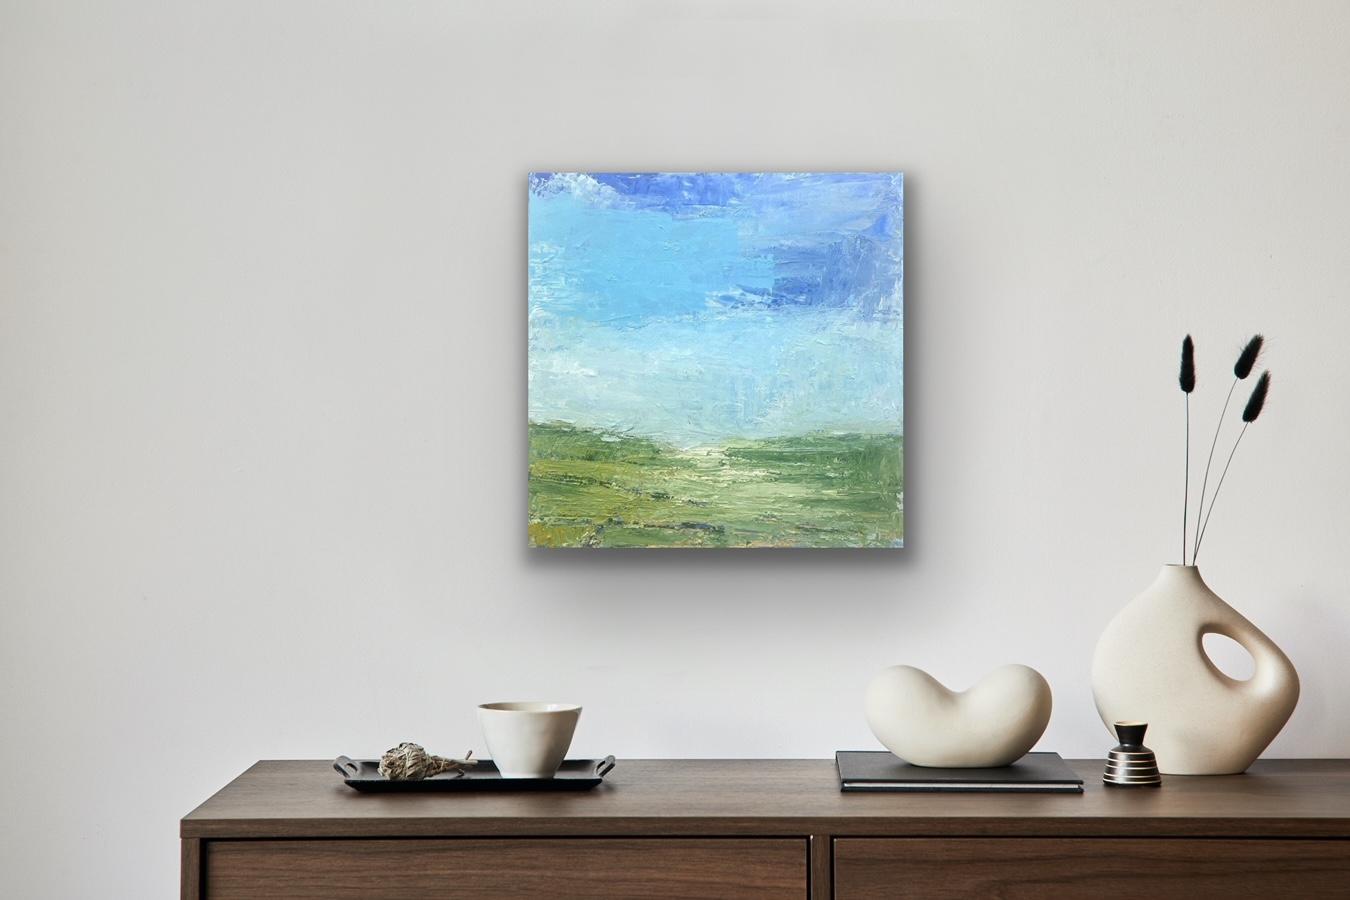 This a a vibrant, uplifting work of art, conveying the spirit where ocean meets the sea.  The artist has a gift for color and uses this as a tool to create a place of calm ambiance where the viewer can daydream a bit.  The piece has a slight bit of